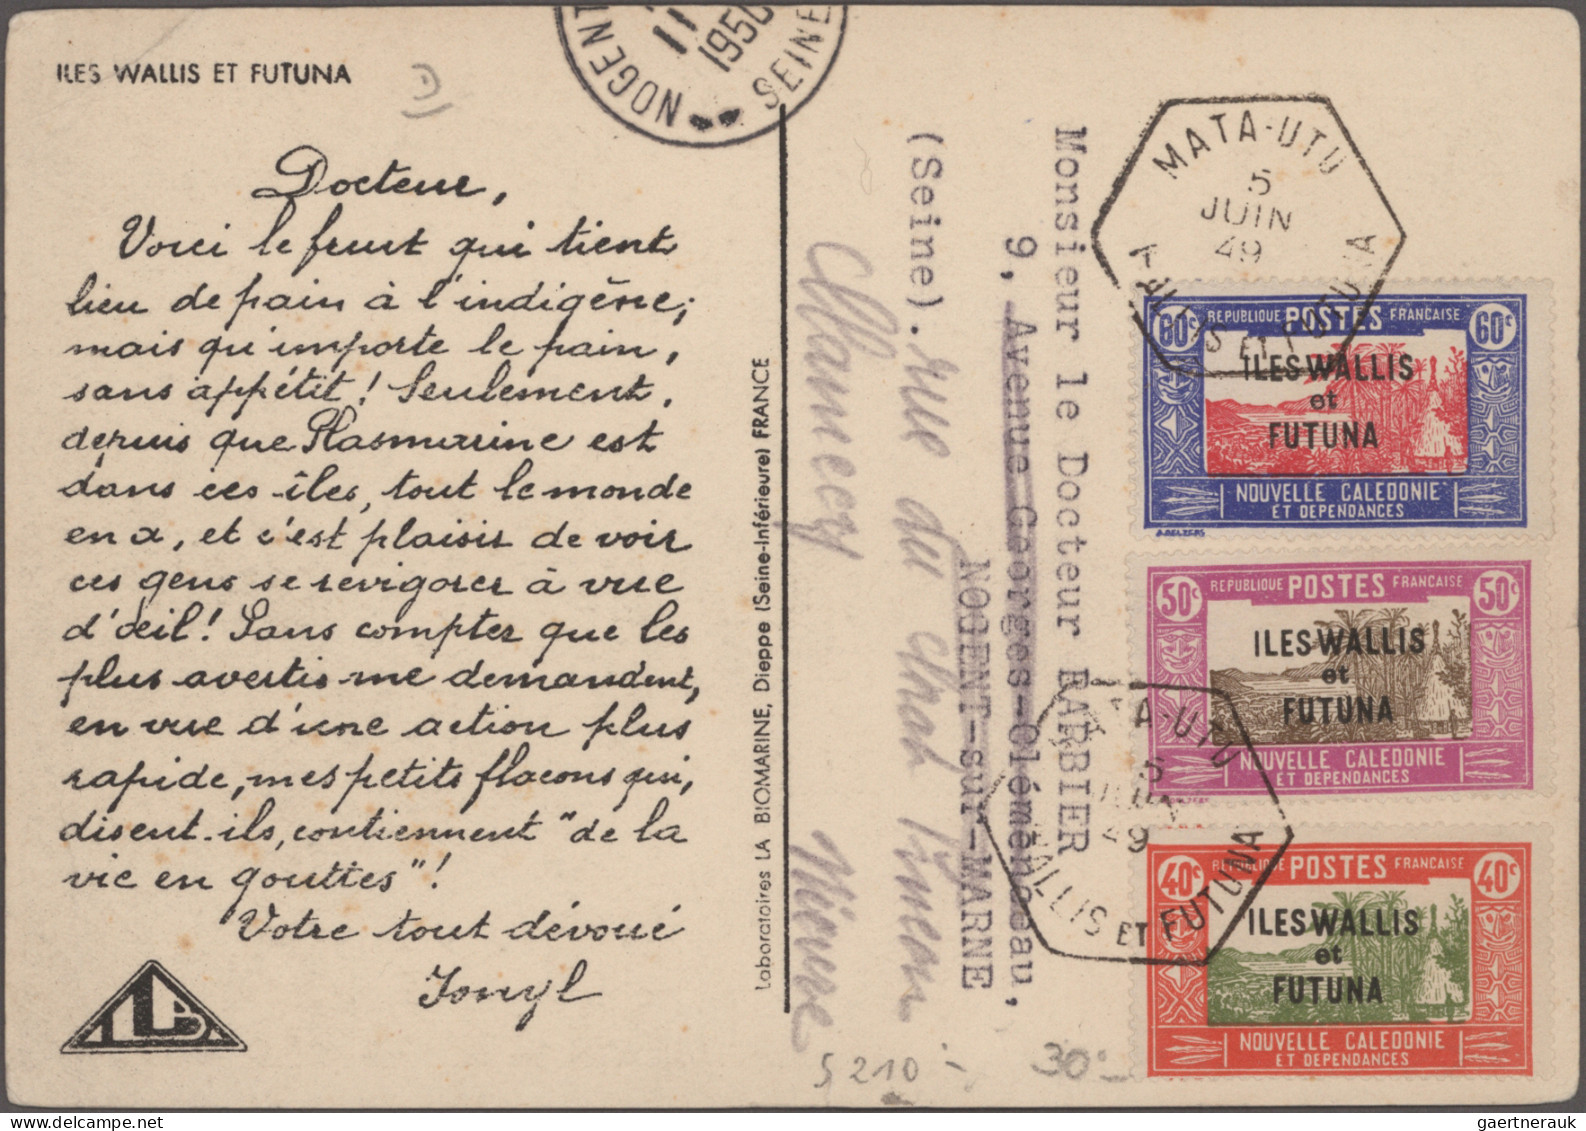 French Colonies: 1924/2005, French colonies/French area, assortment of apprx. 10